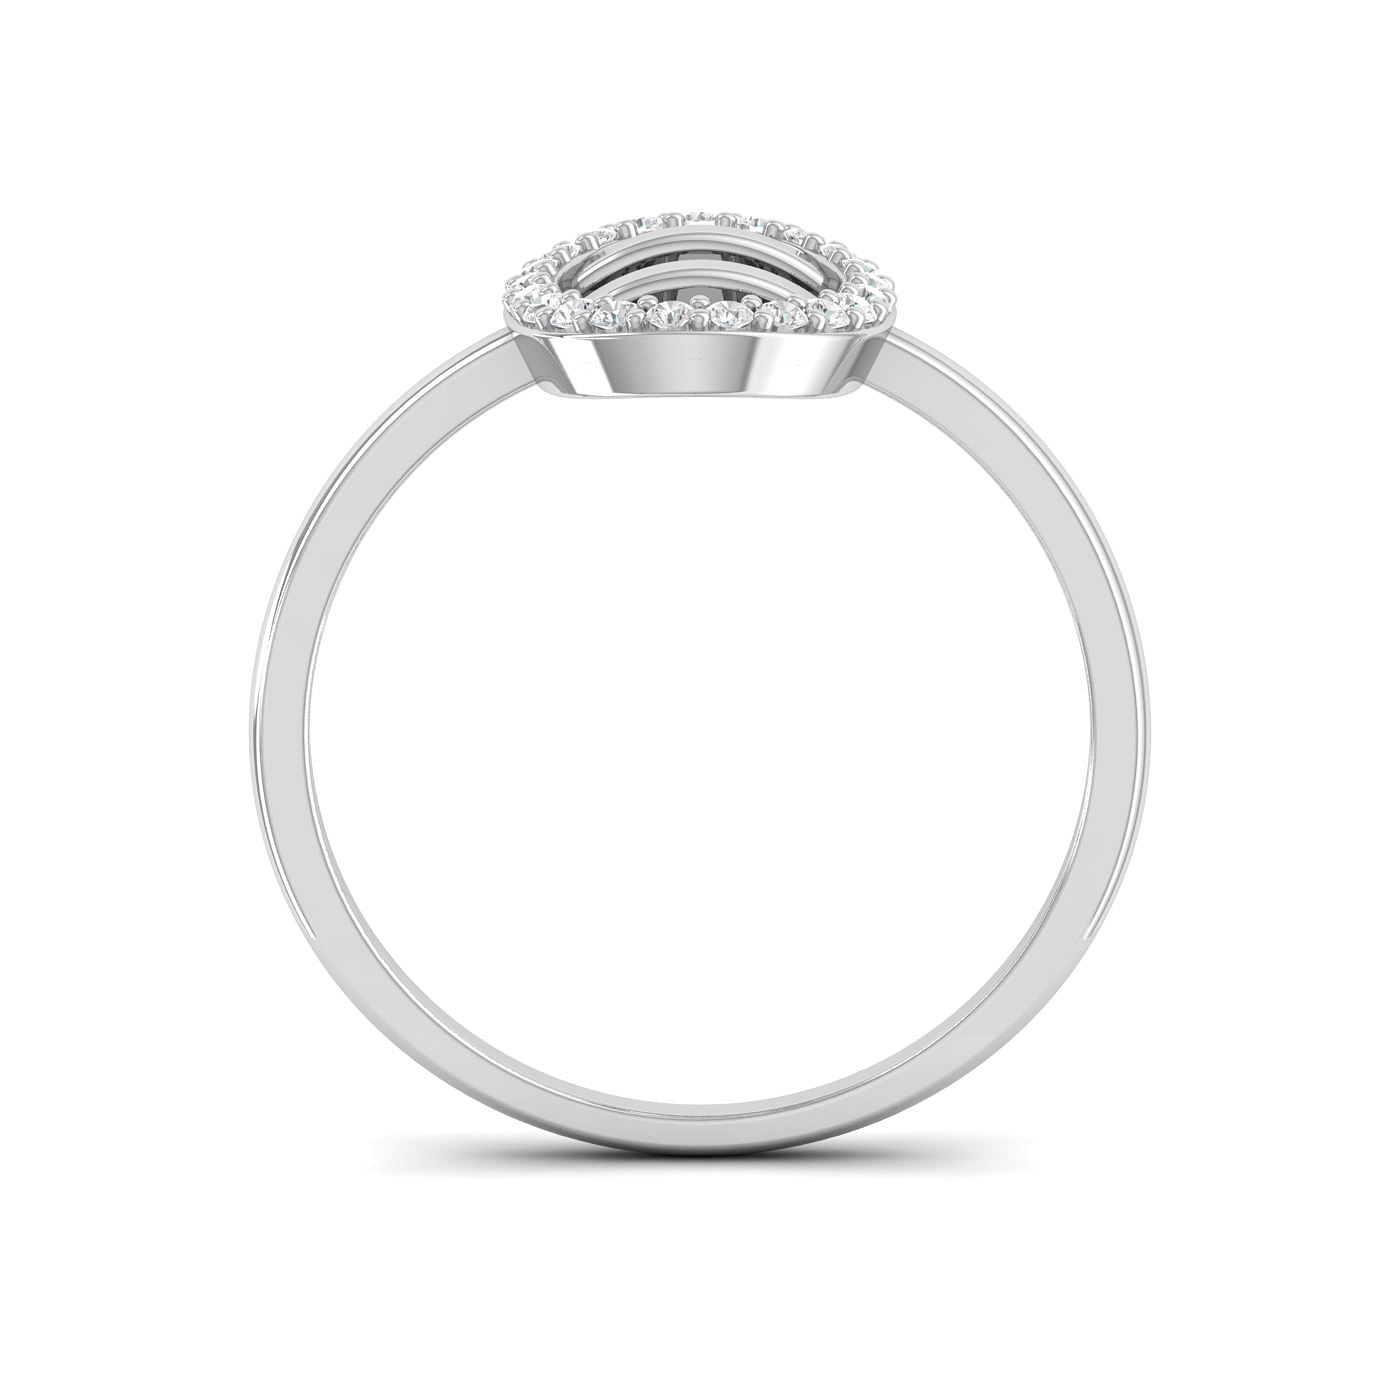 Oval Parallel Line White Gold Diamond Ring